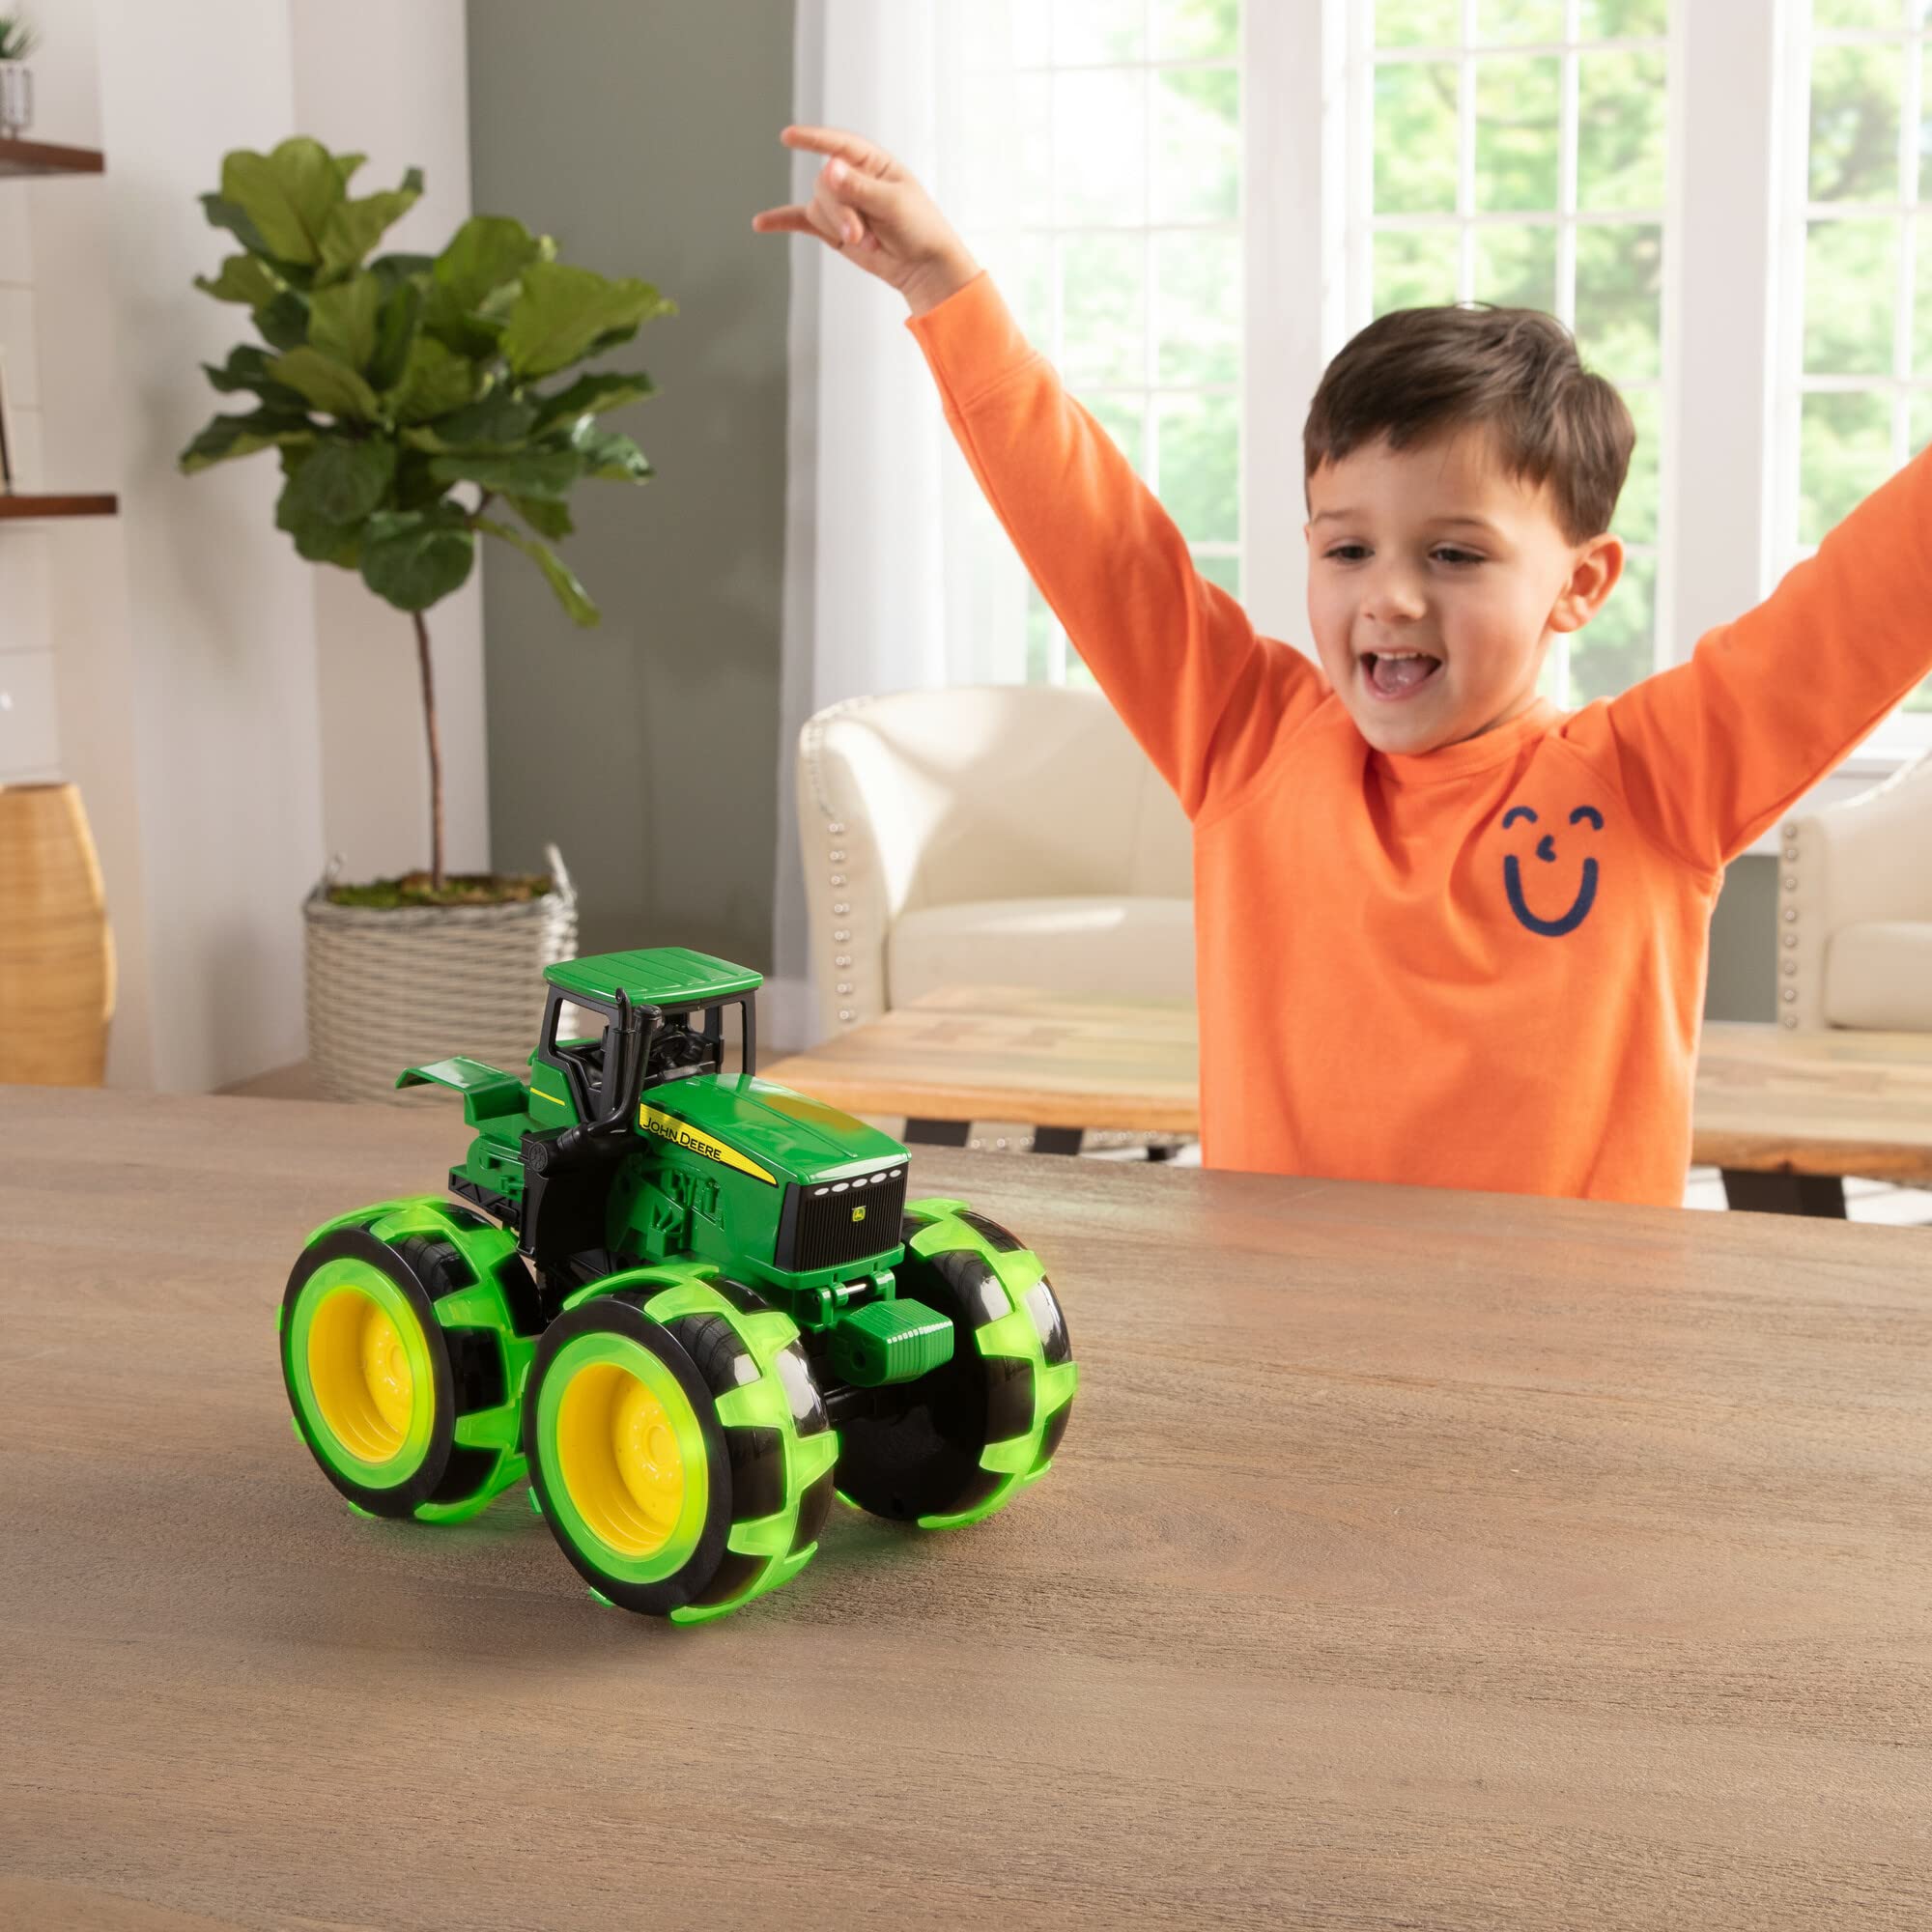 John Deere Tractor - Monster Treads Lightning Wheels - Motion Activated Light Up Monster Truck Toy - John Deere Tractor Toys - Kids Toys Ages 3 Years and Up,Green